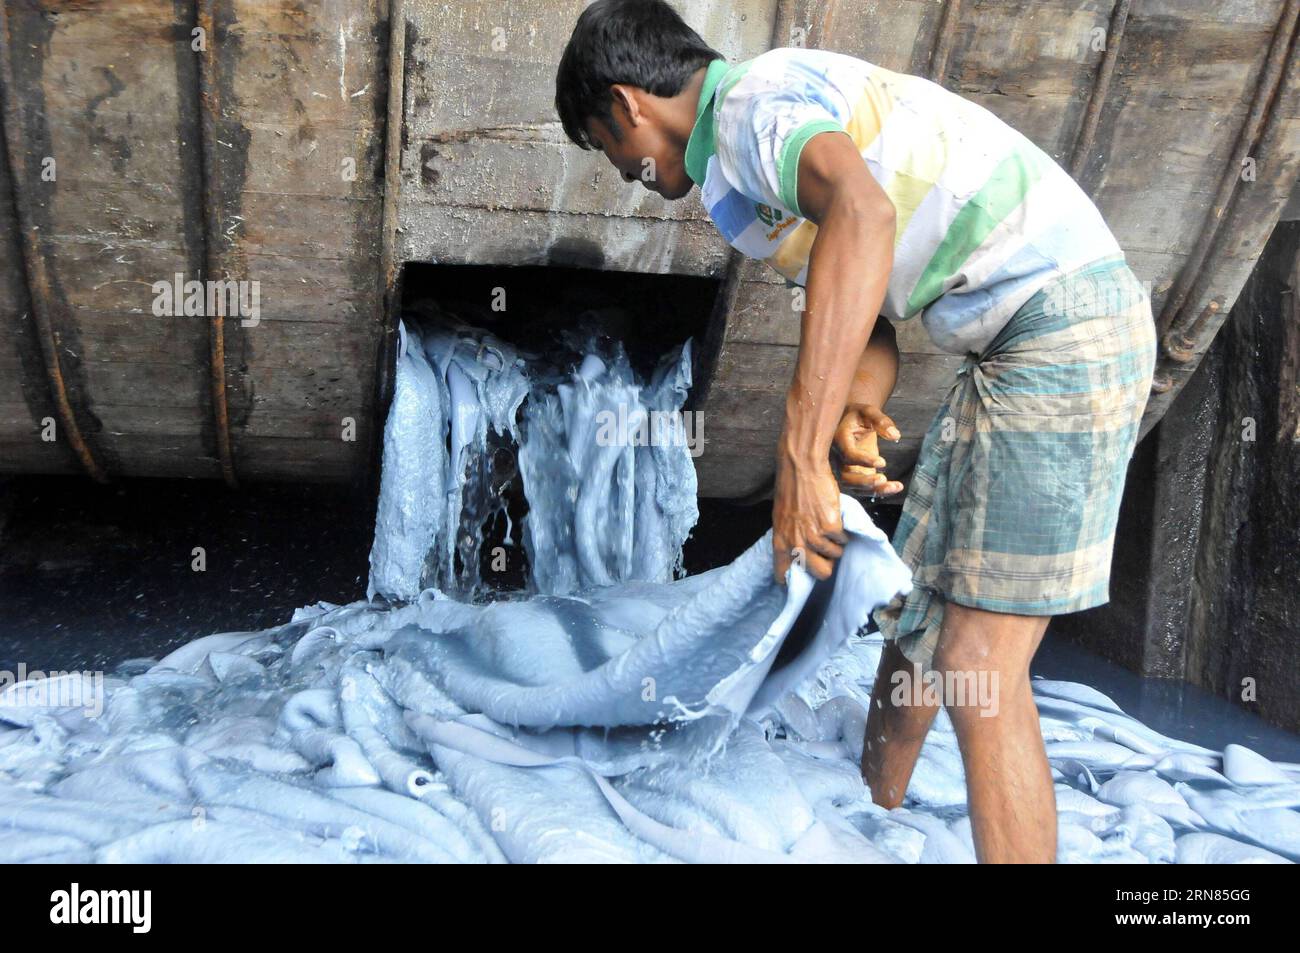 DHAKA, Oct. 7, 2015 -- A man works in a leather factory at Hazaribagh in Dhaka, capital of Bangladesh, on Oct. 7, 2015. Bangladesh s tannery industry looks set to suffer a big blow as demand for finished leather and leather products in major international markets has been plunging amid grave concerns over the environmental hazard created by the country s leather industry. ) BANGLADESH-DHAKA-TANNERY SharifulxIslam PUBLICATIONxNOTxINxCHN   Dhaka OCT 7 2015 a Man Works in a Leather Factory AT Hazaribagh in Dhaka Capital of Bangladesh ON OCT 7 2015 Bangladesh S tannery Industry Looks Set to suffer Stock Photo